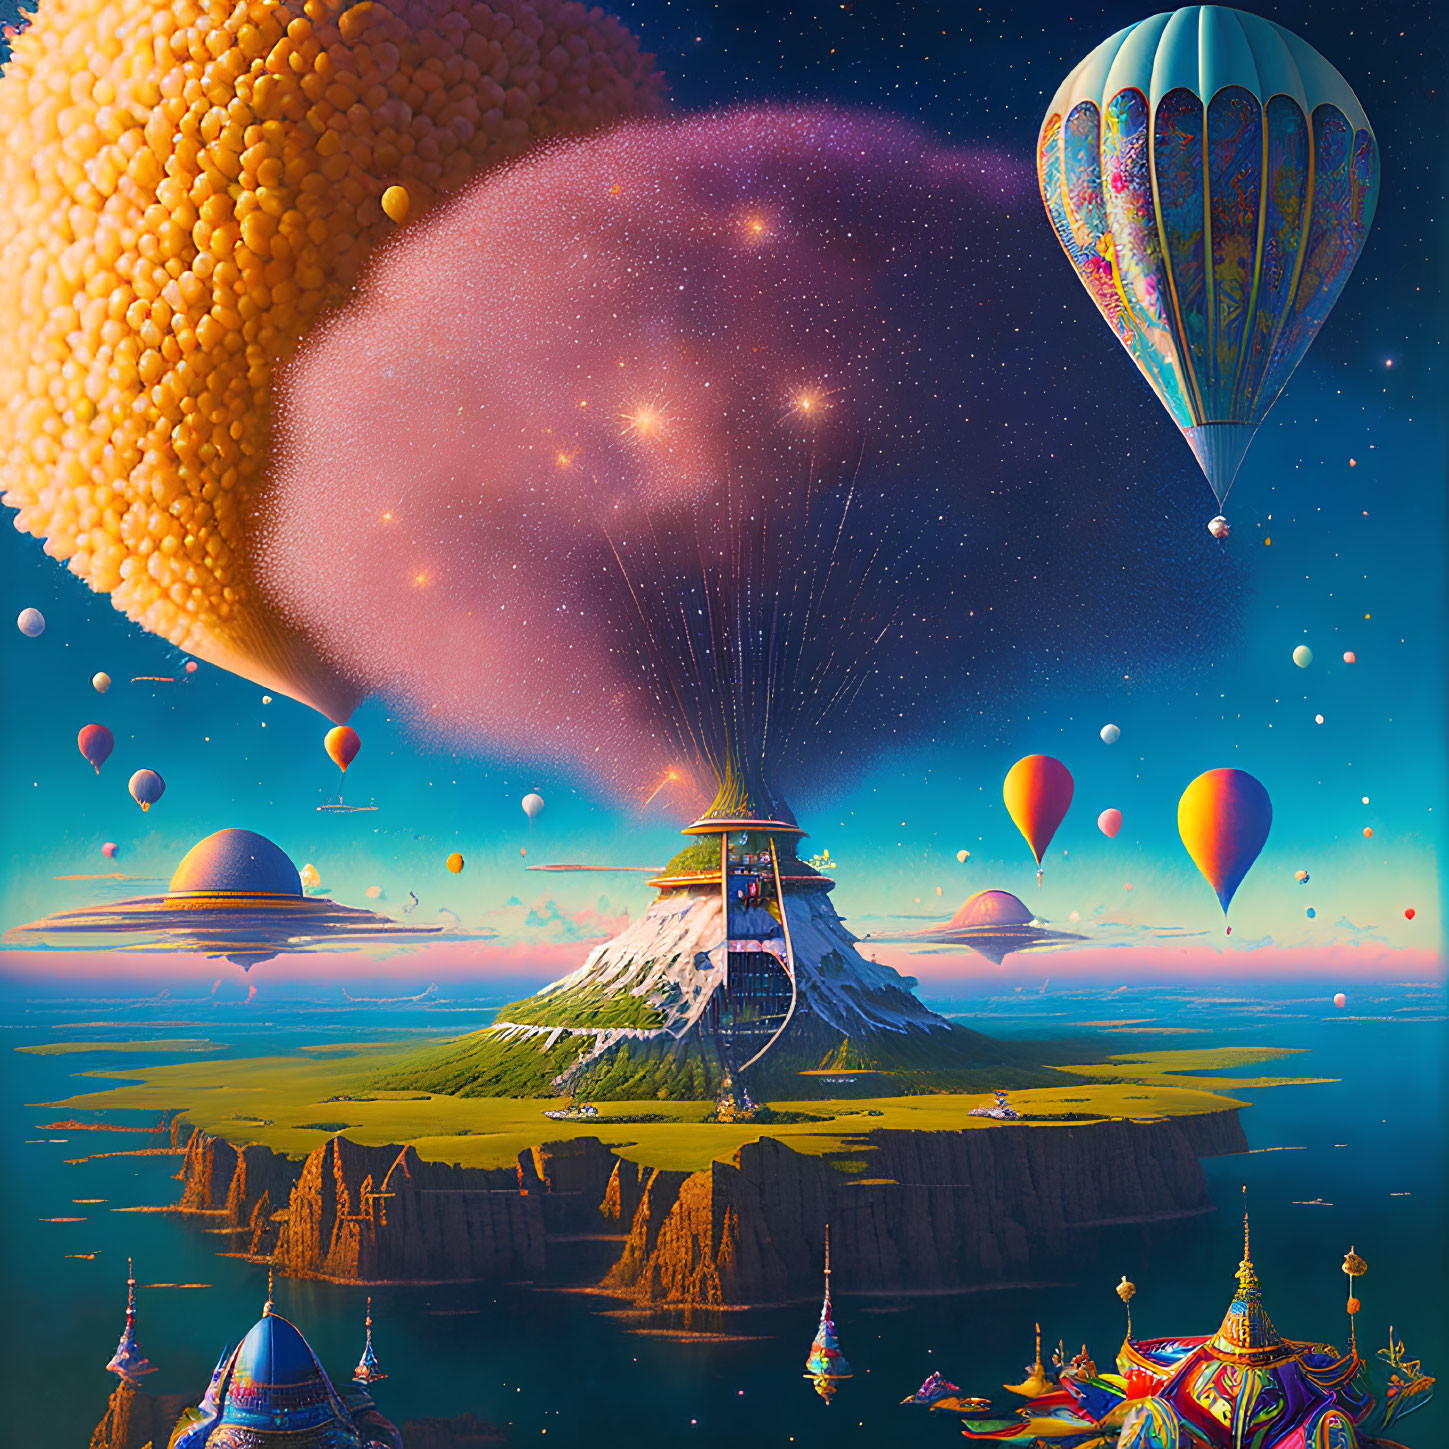 Colorful fantasy landscape with floating island, hot air balloons, and mountain structure.